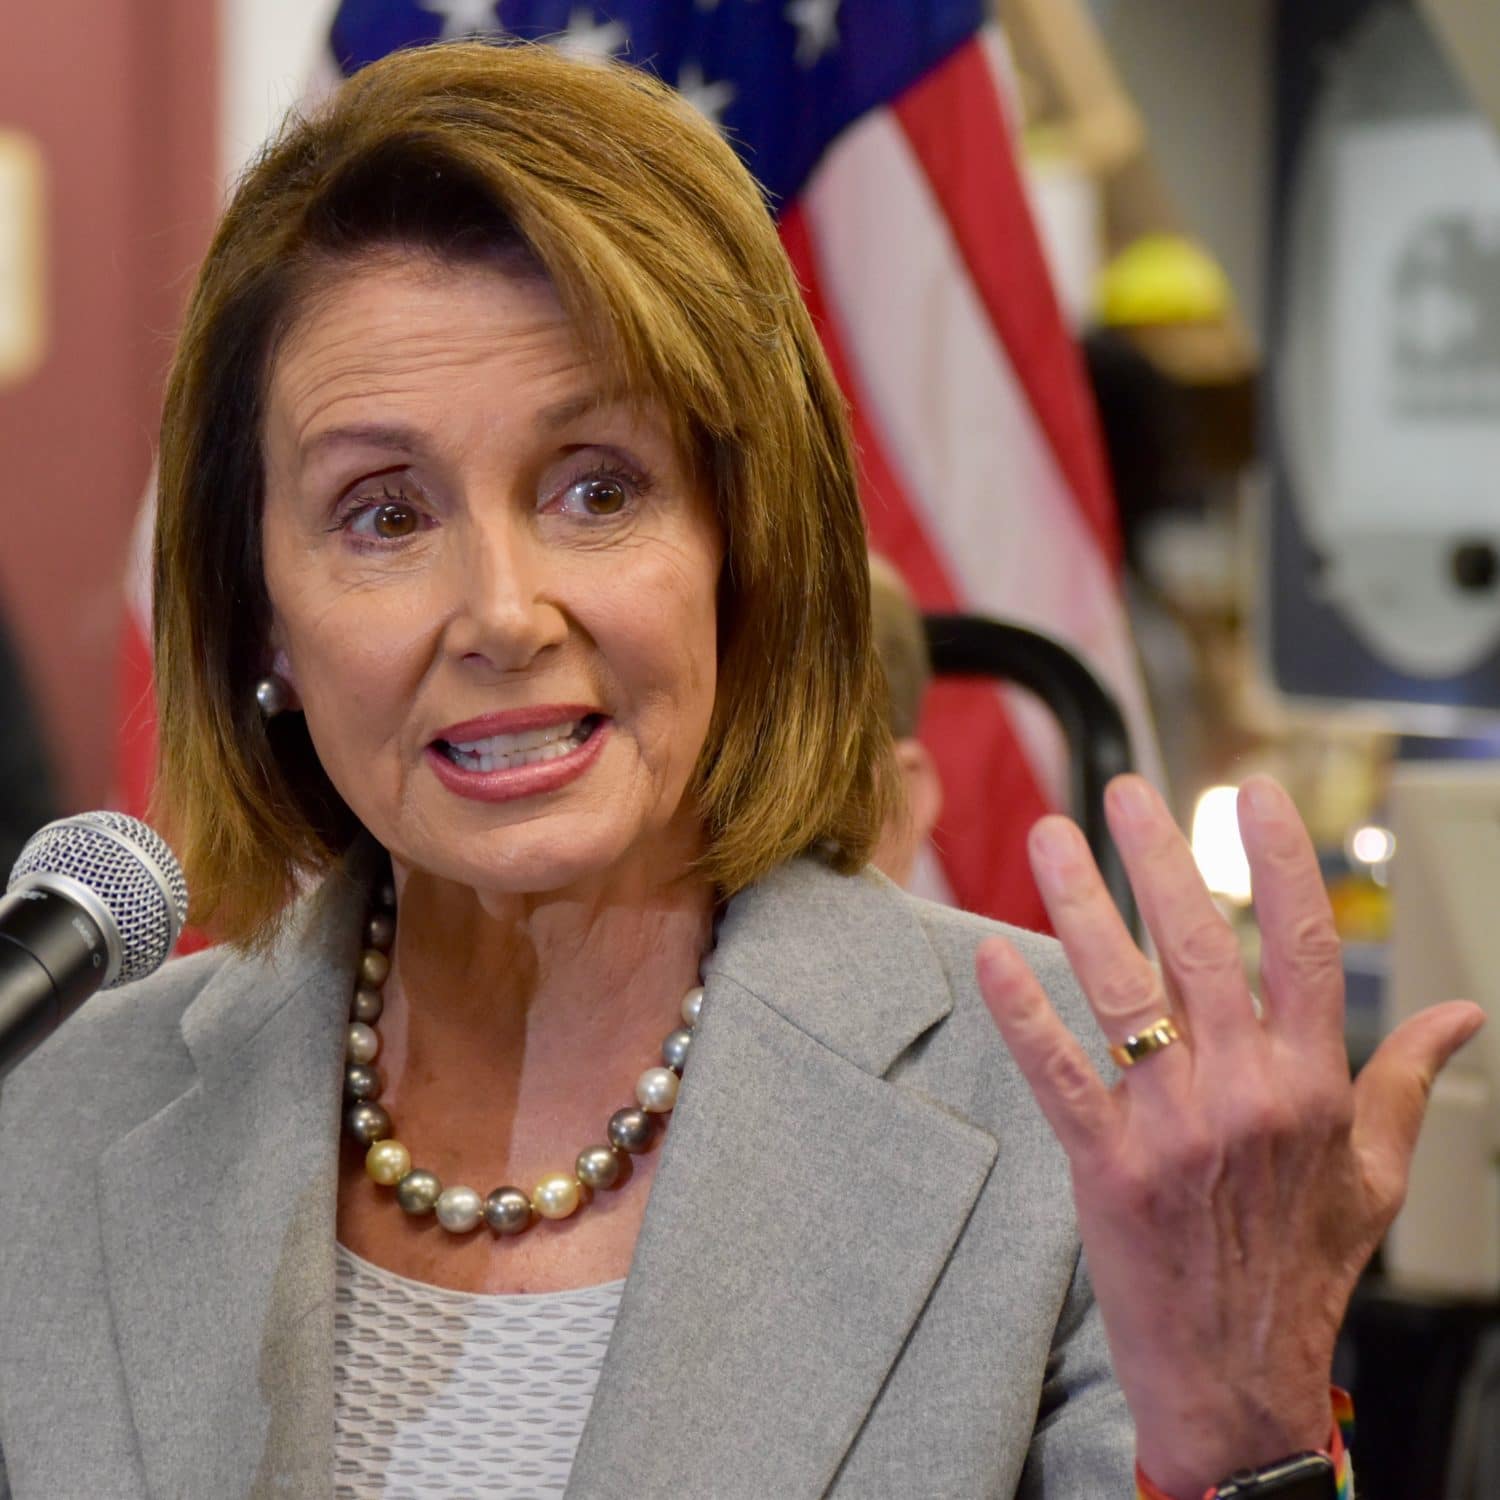 Nancy Pelosi in RI: GOP tax plan favors billionaires at middle class expense